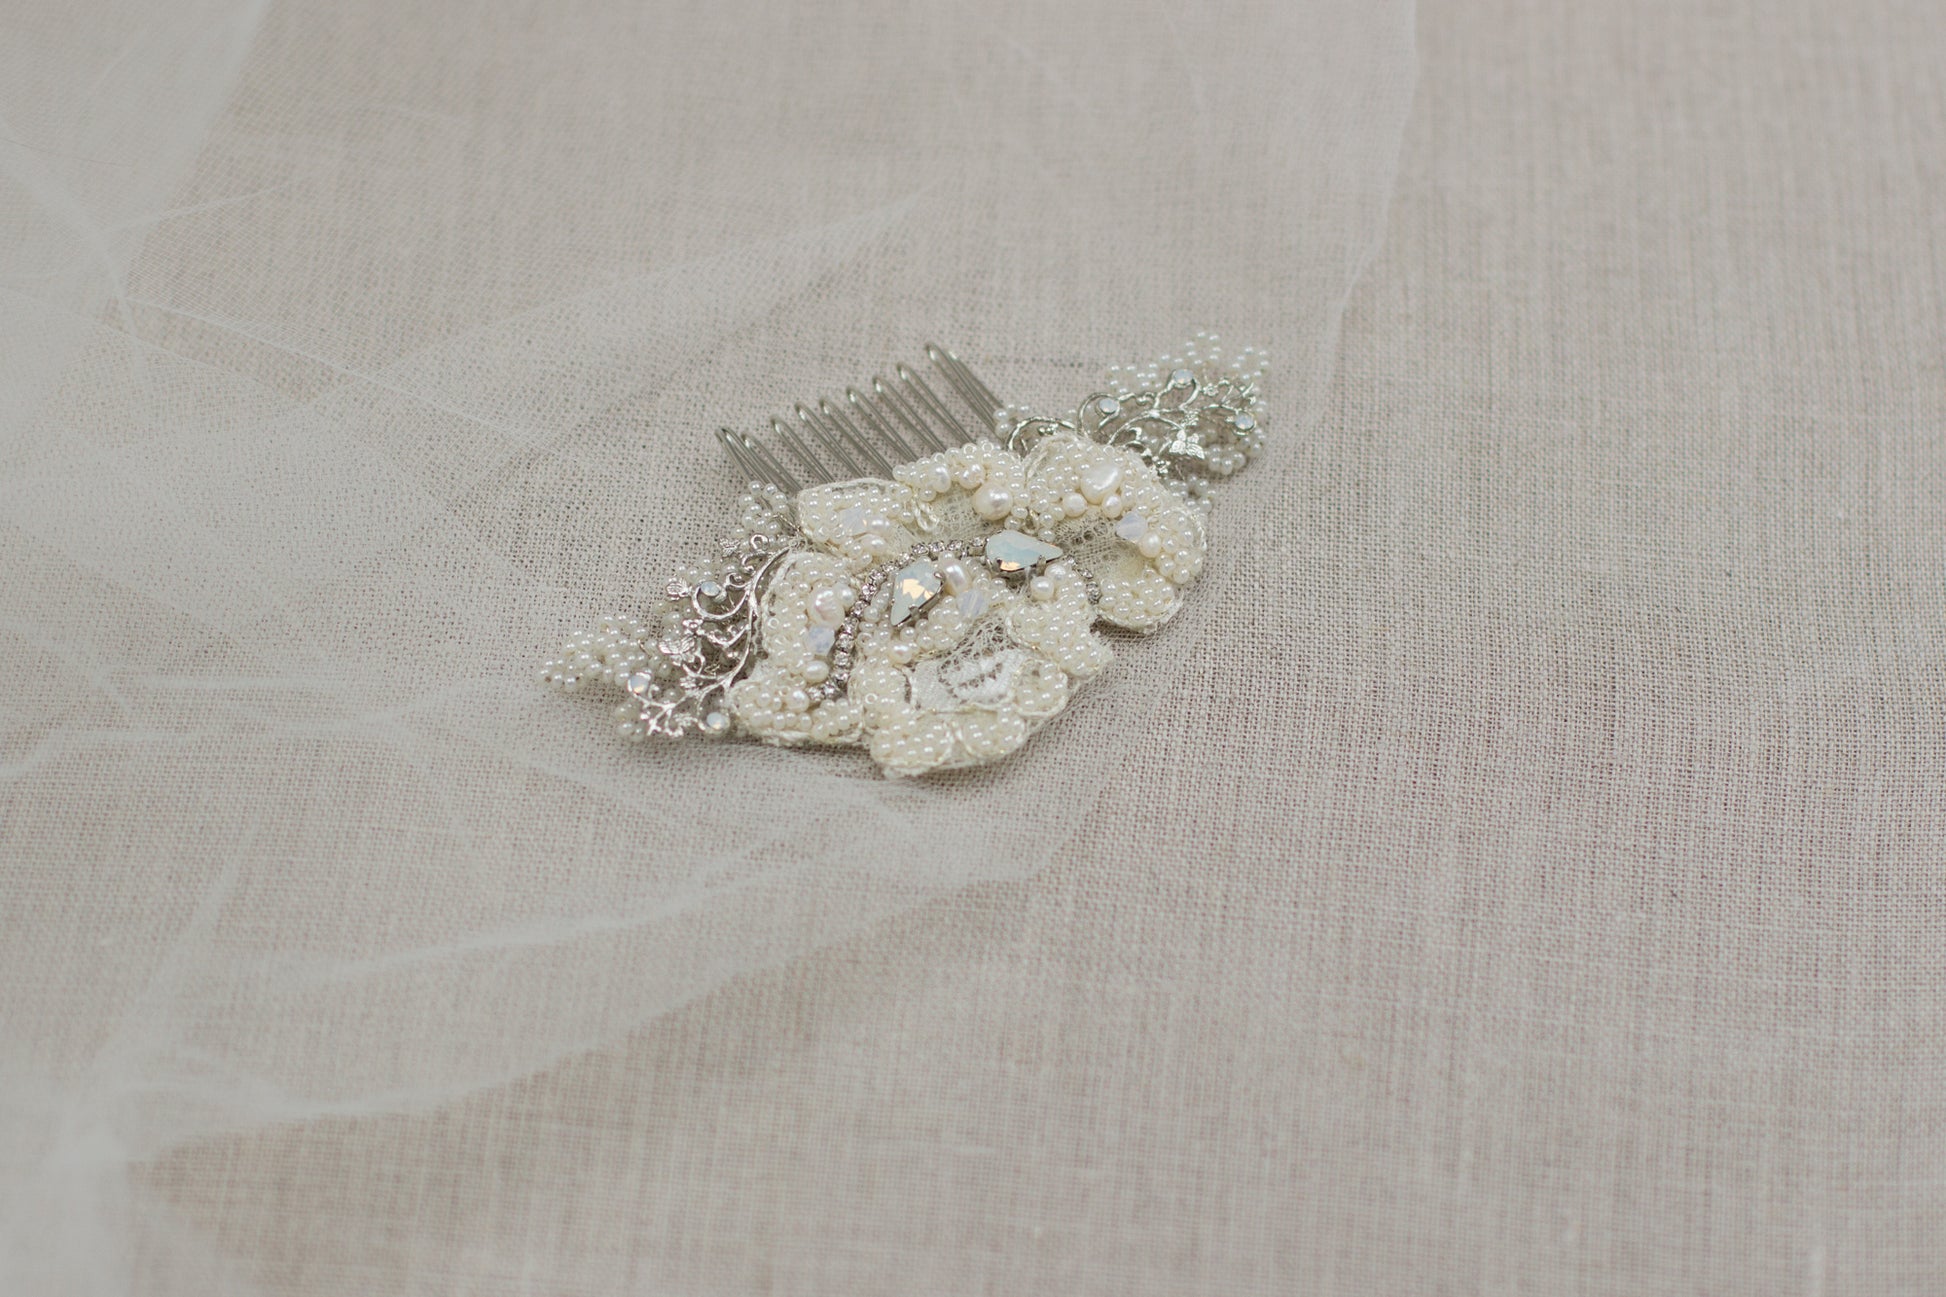 Looking for unique handmade wedding hair accessories? Check out our online bridal boutique in Europe. Stunning lace bridal hair comb made with beautiful pearls and adorned with floral motifs. Lace wedding headpiece, crystal hair comb, hair adornment to complete your bridal look. Shop now and find the perfect wedding hair piece for your special day.